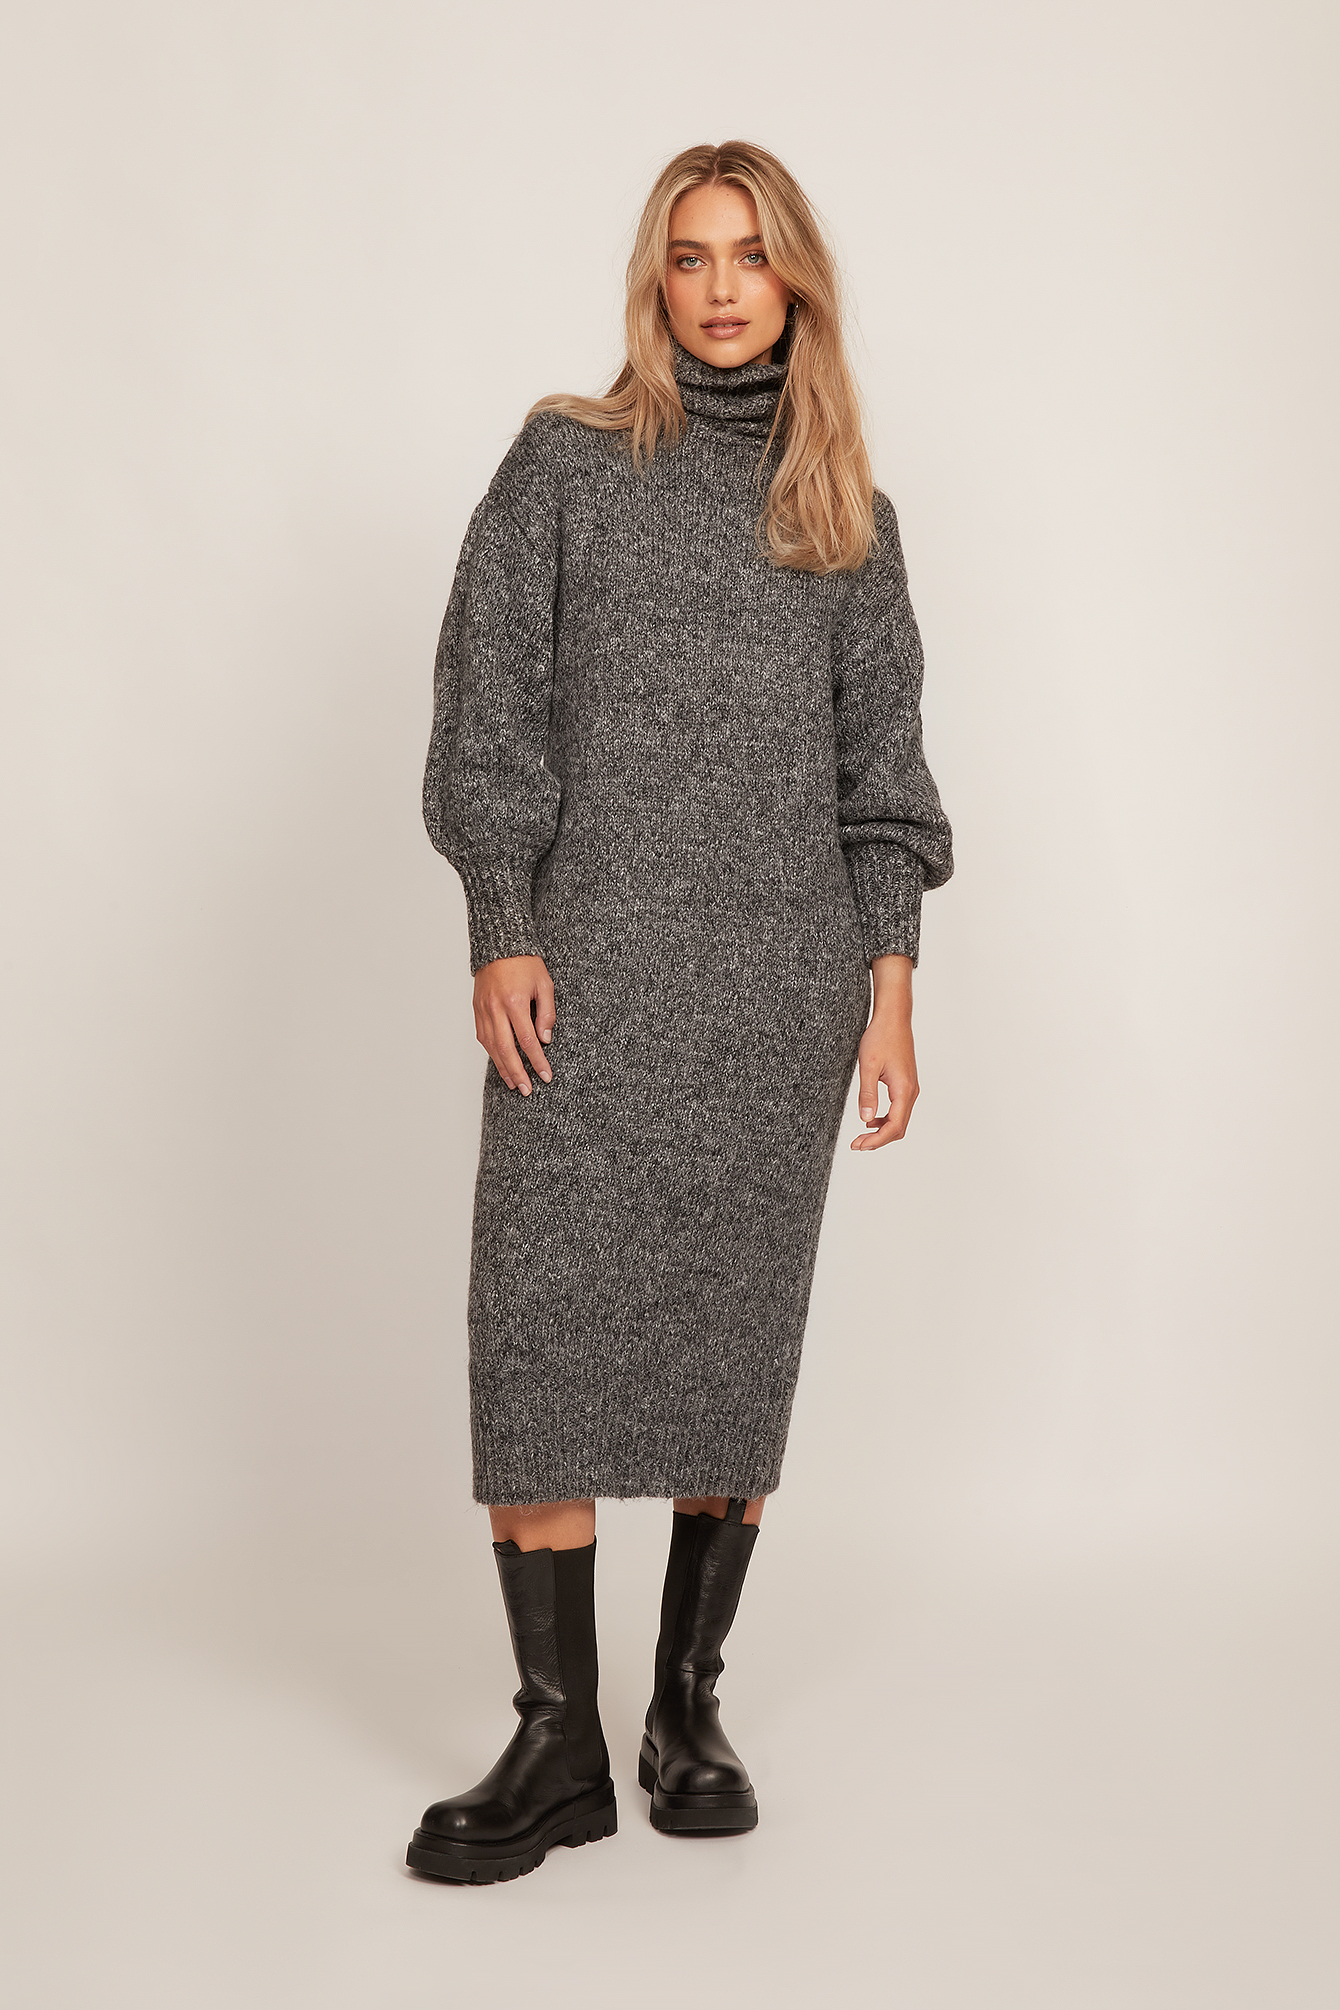 High Neck Oversized Knitted Dress Outfit.